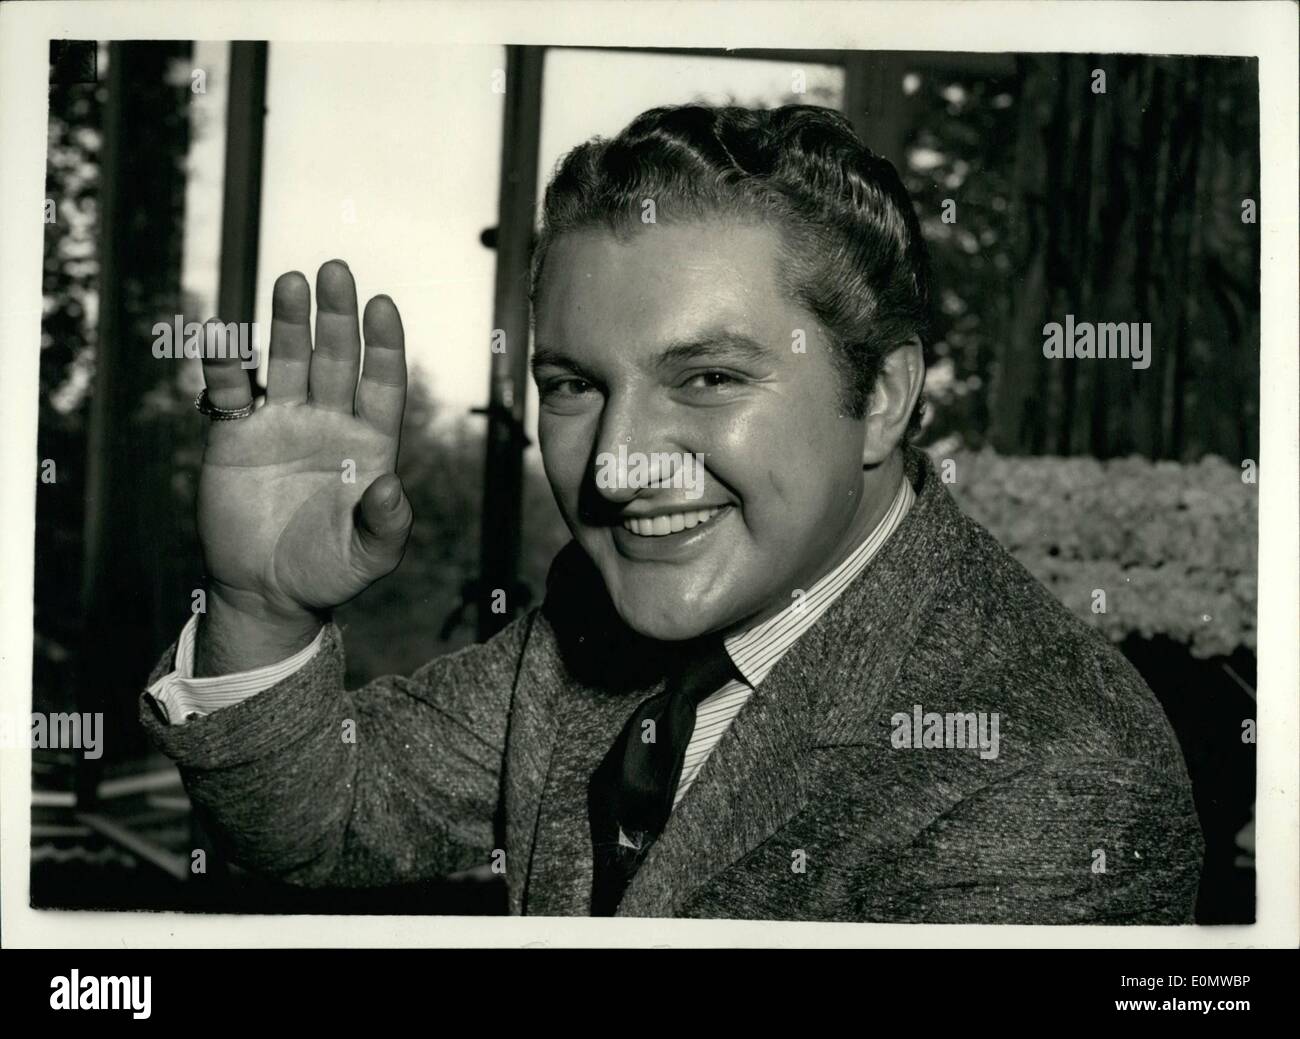 Sep. 09, 1956 - Liberace Arrives In London. Photo shows Liberace, the famous pianist, who was given a great reception when he arrived in London today - gives his famous smile for the cameraman at the Savoy Hotel today. Stock Photo